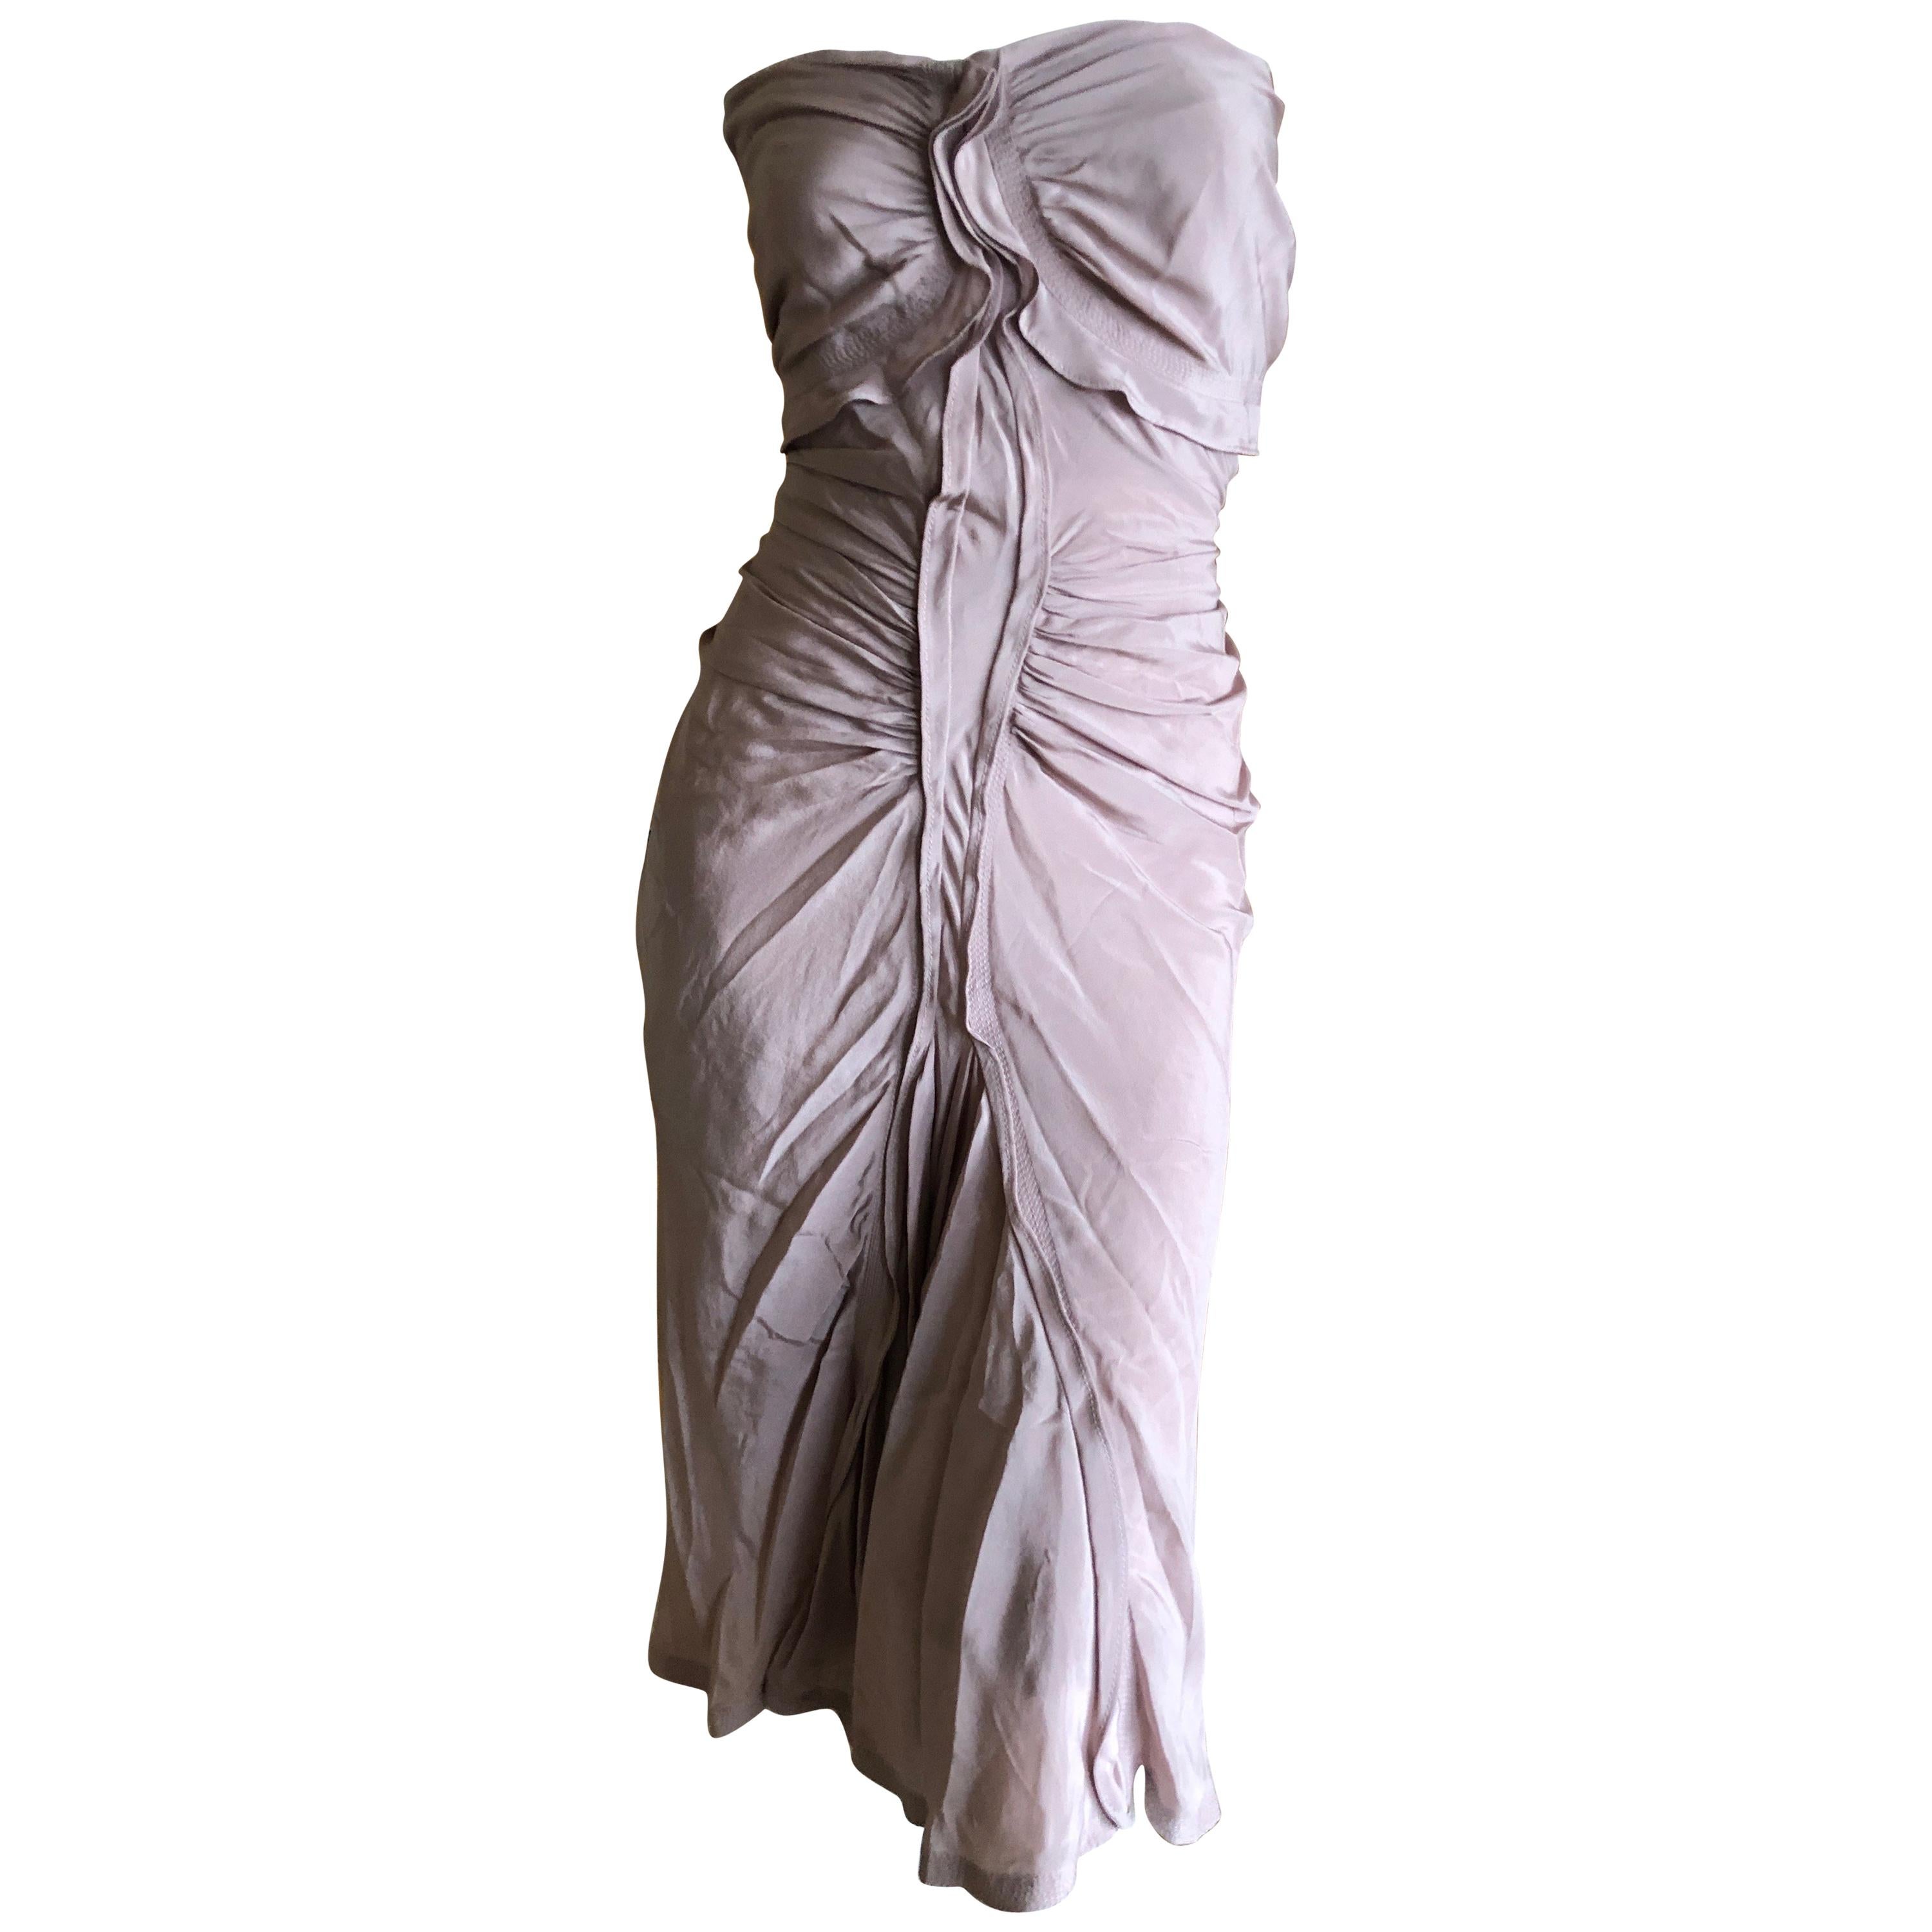 Yves Saint Laurent by Tom Ford 2003 Ruffled Strapless Mauve Silk  Dress  For Sale